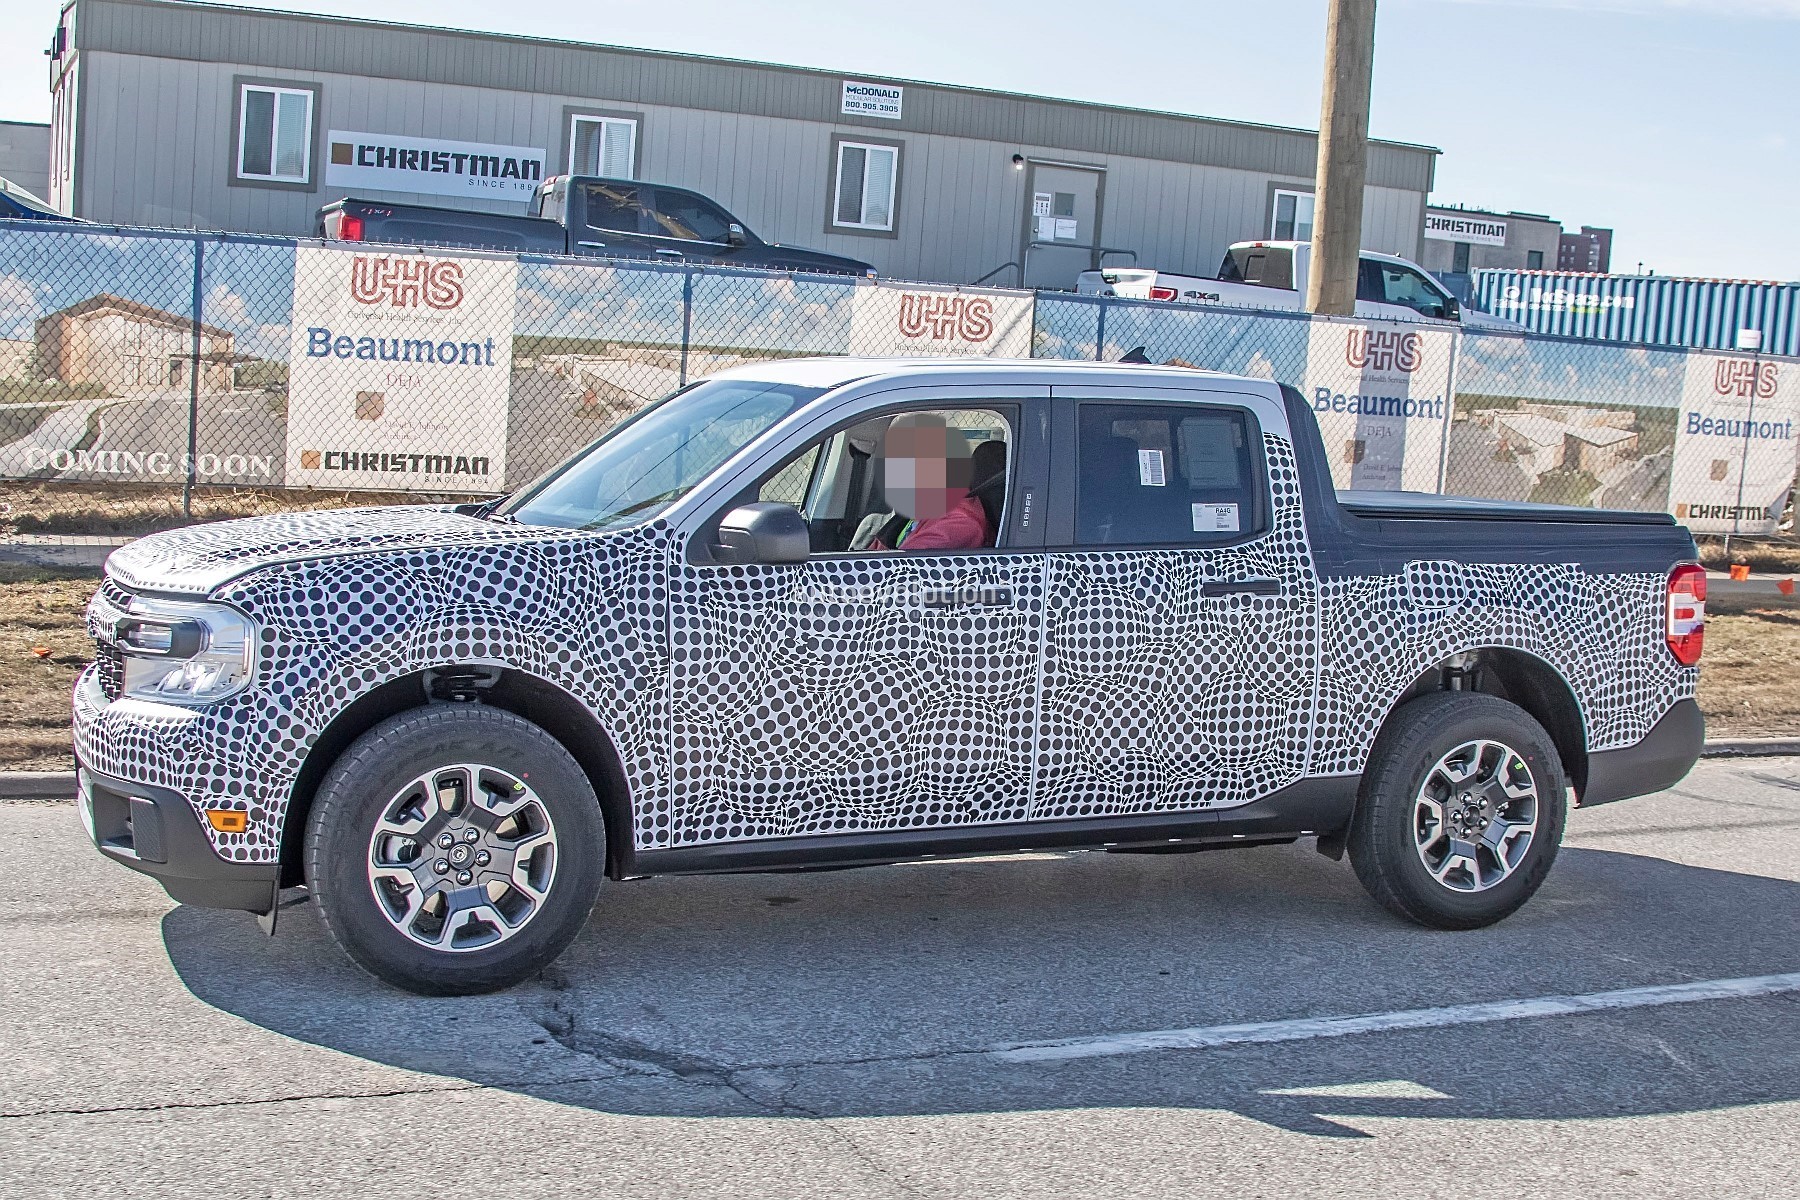 2022 Ford Maverick Photographed Uncamouflaged During Commercial Shoot